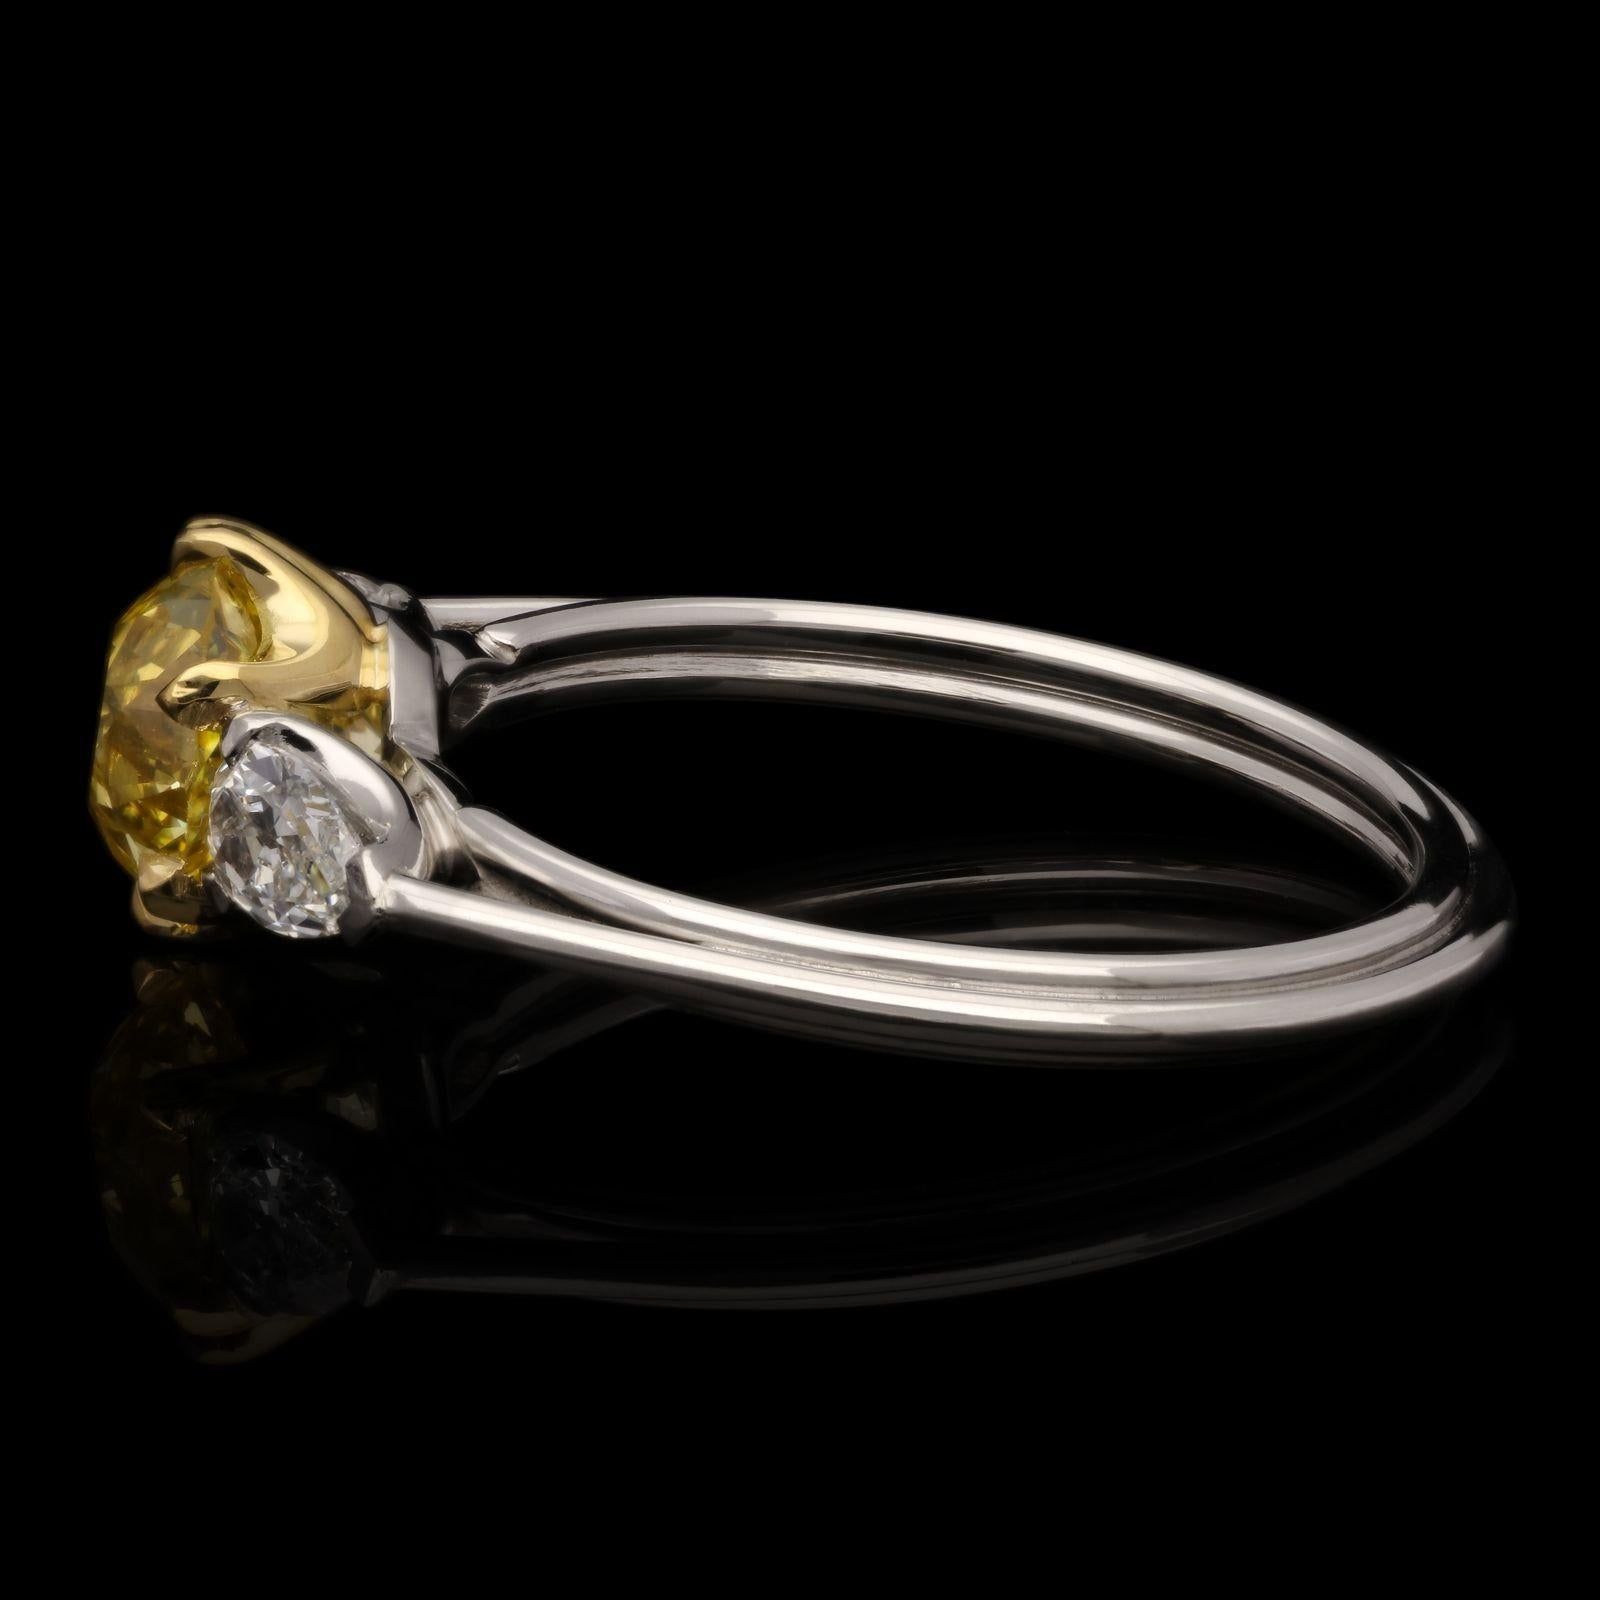 Hancocks 1.27ct Fancy Intense Yellow Old European Brilliant Cut Diamond Ring In New Condition For Sale In London, GB